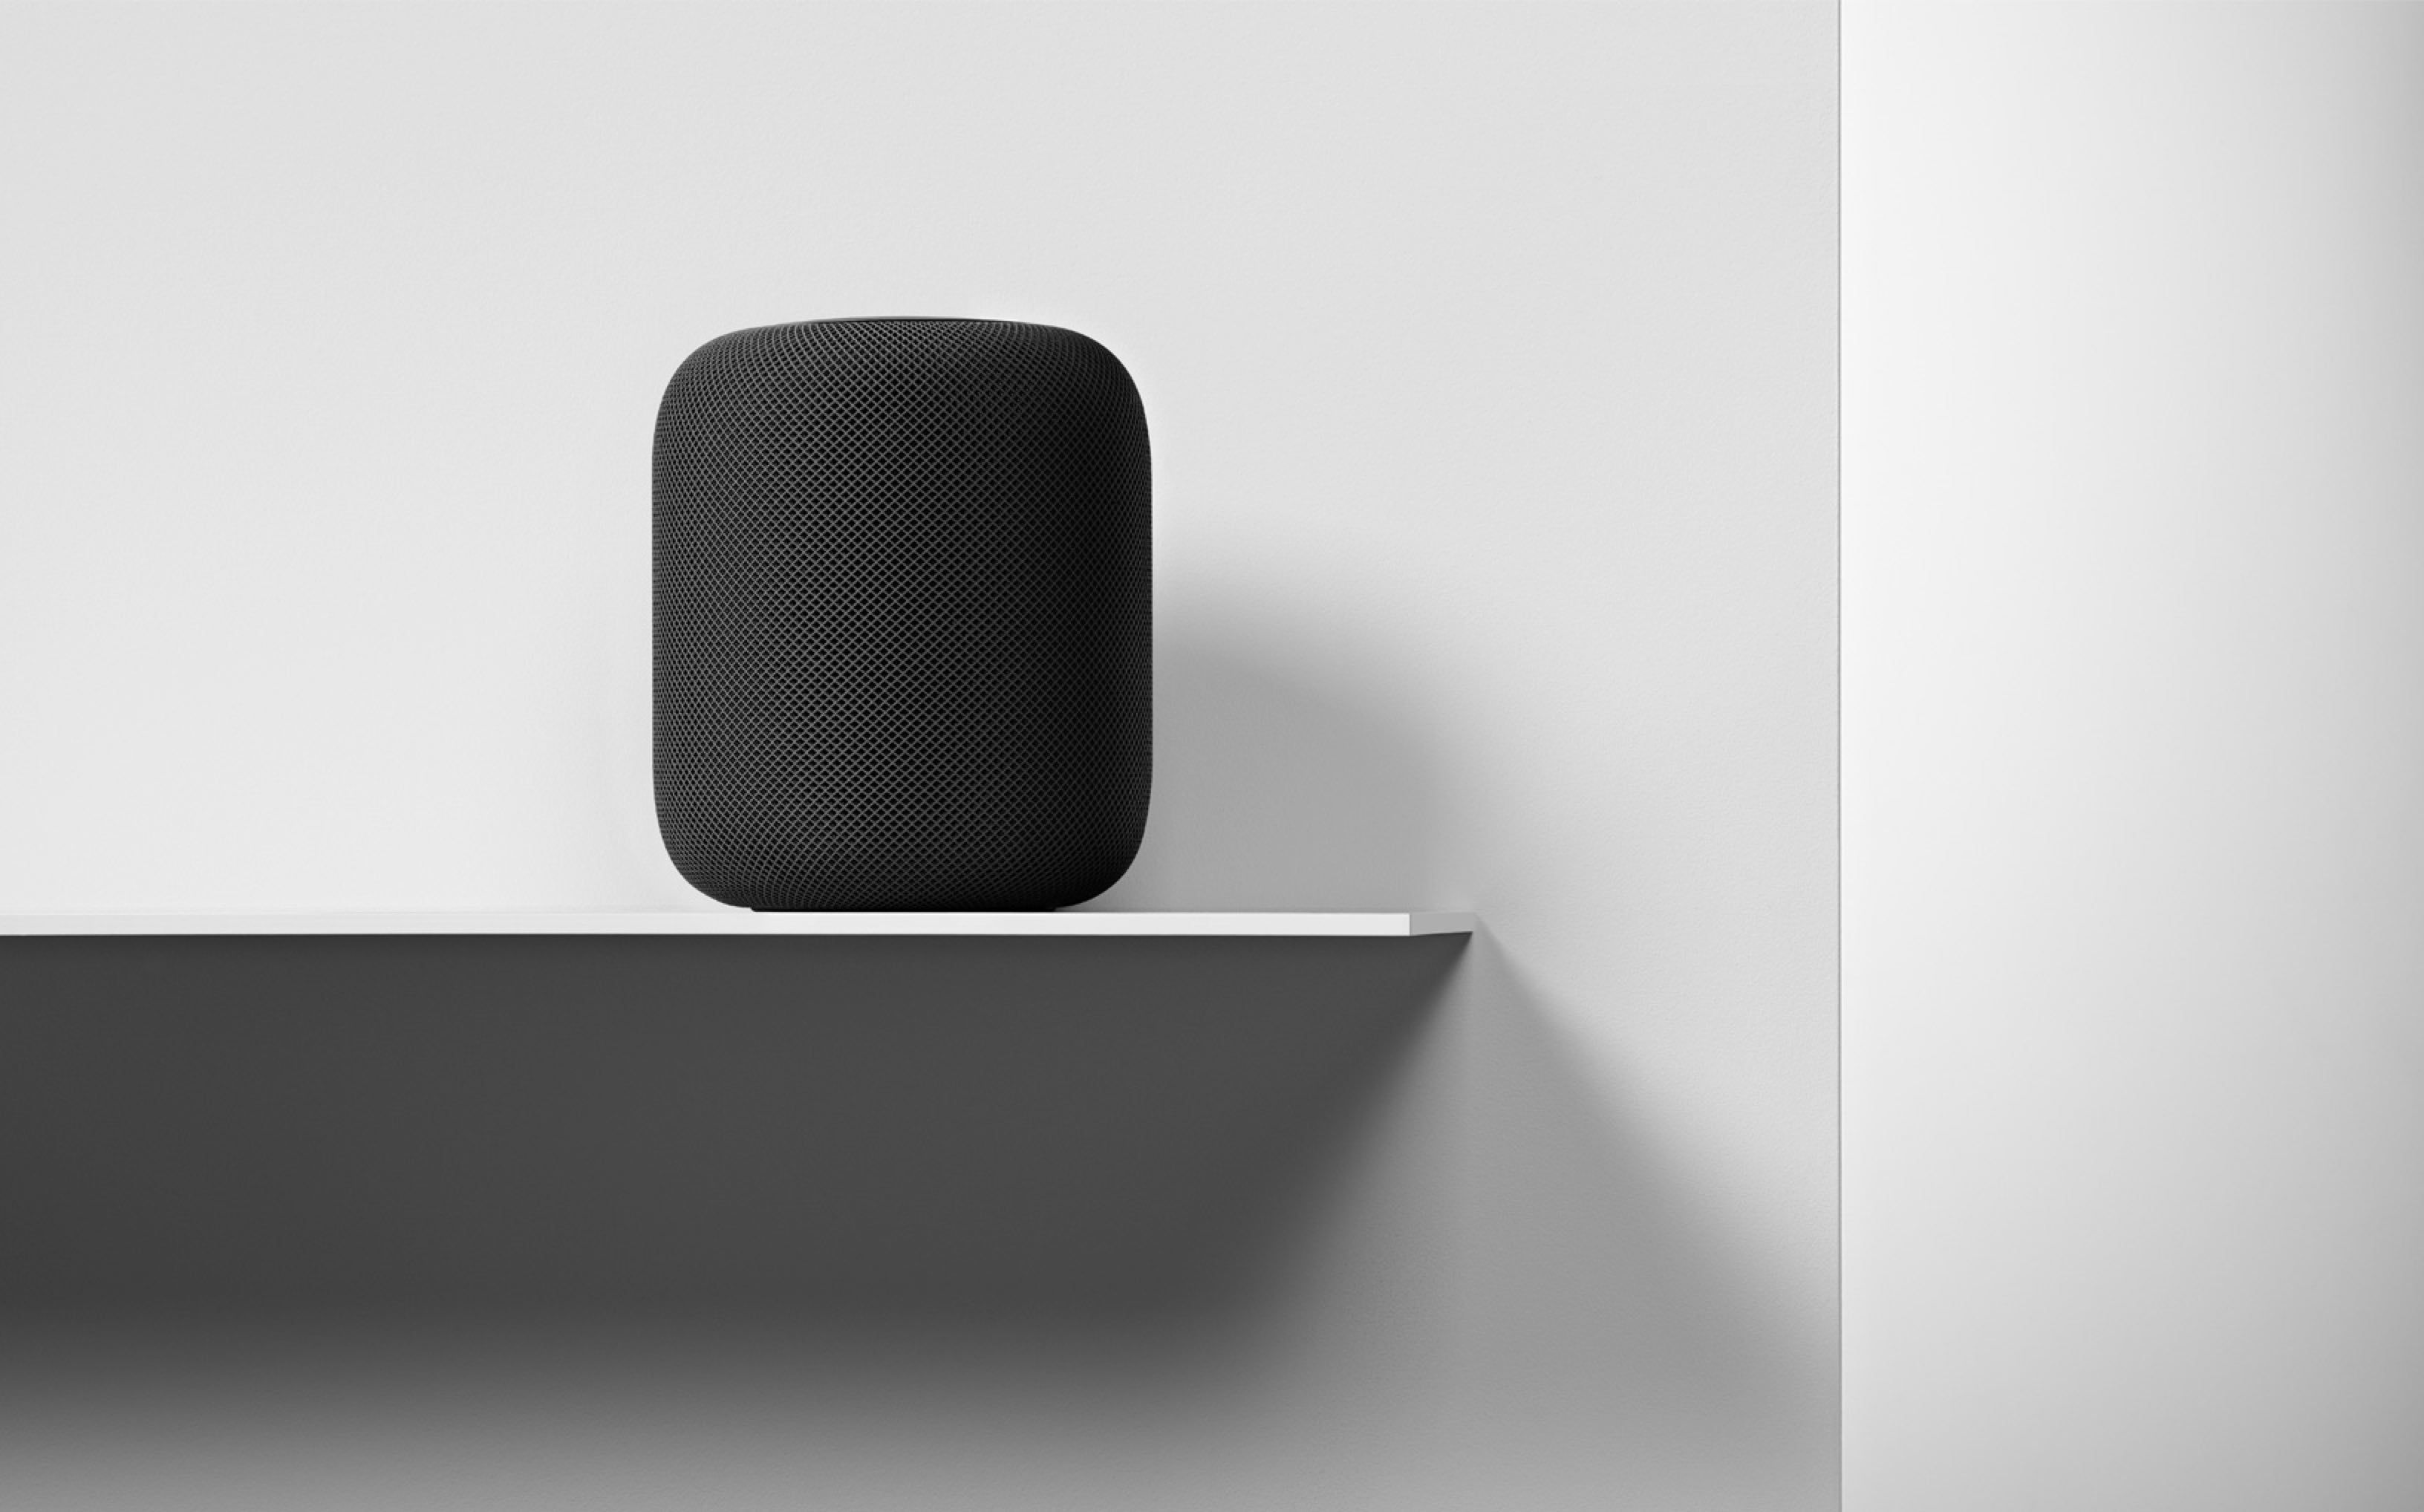 Why The Apple Homepod Sounds So Good image 4